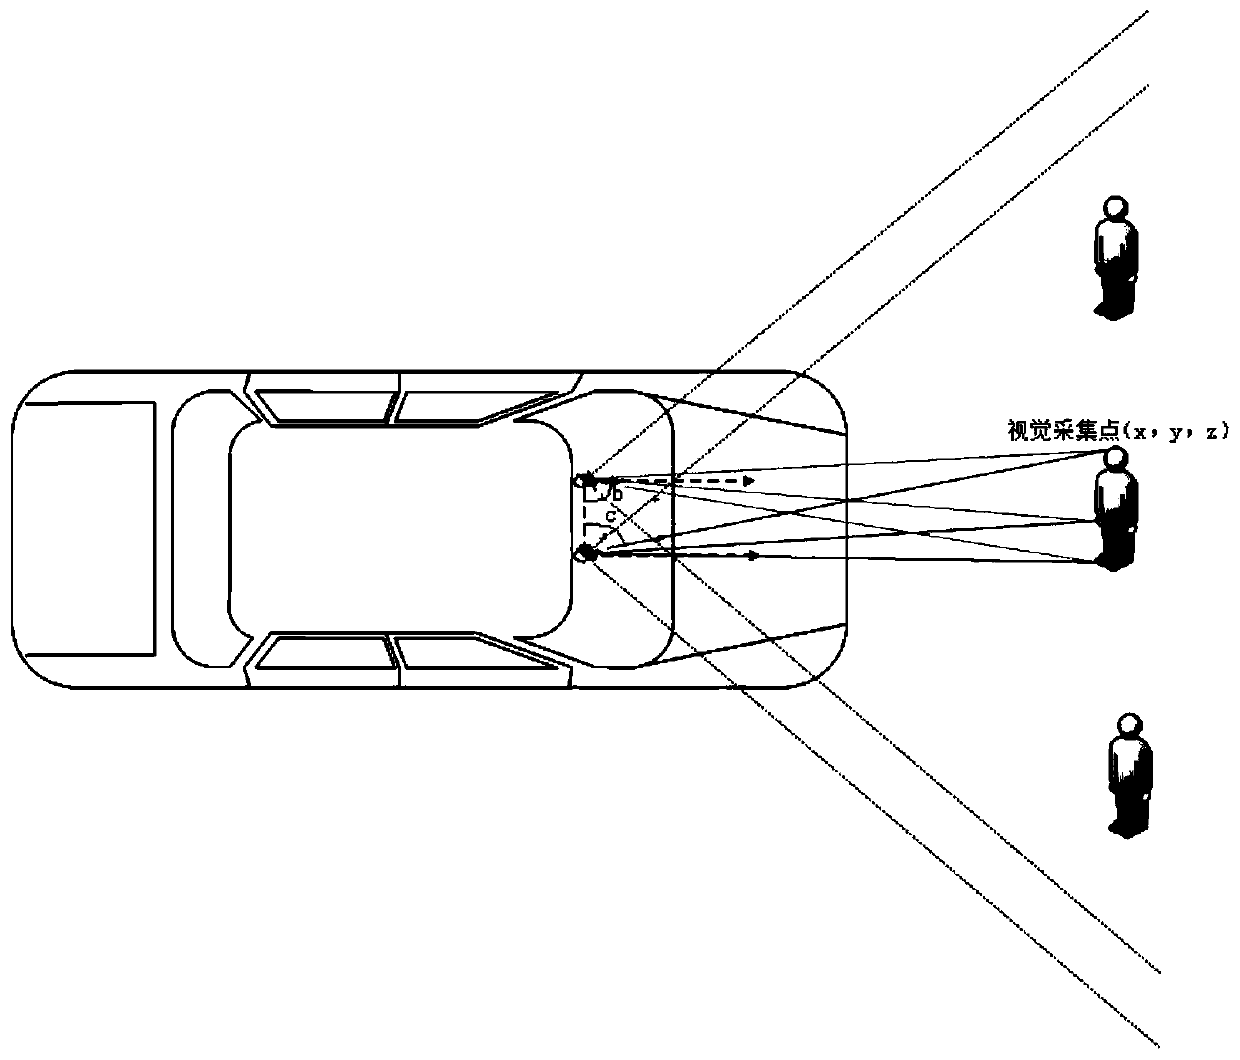 Automatic driving control method